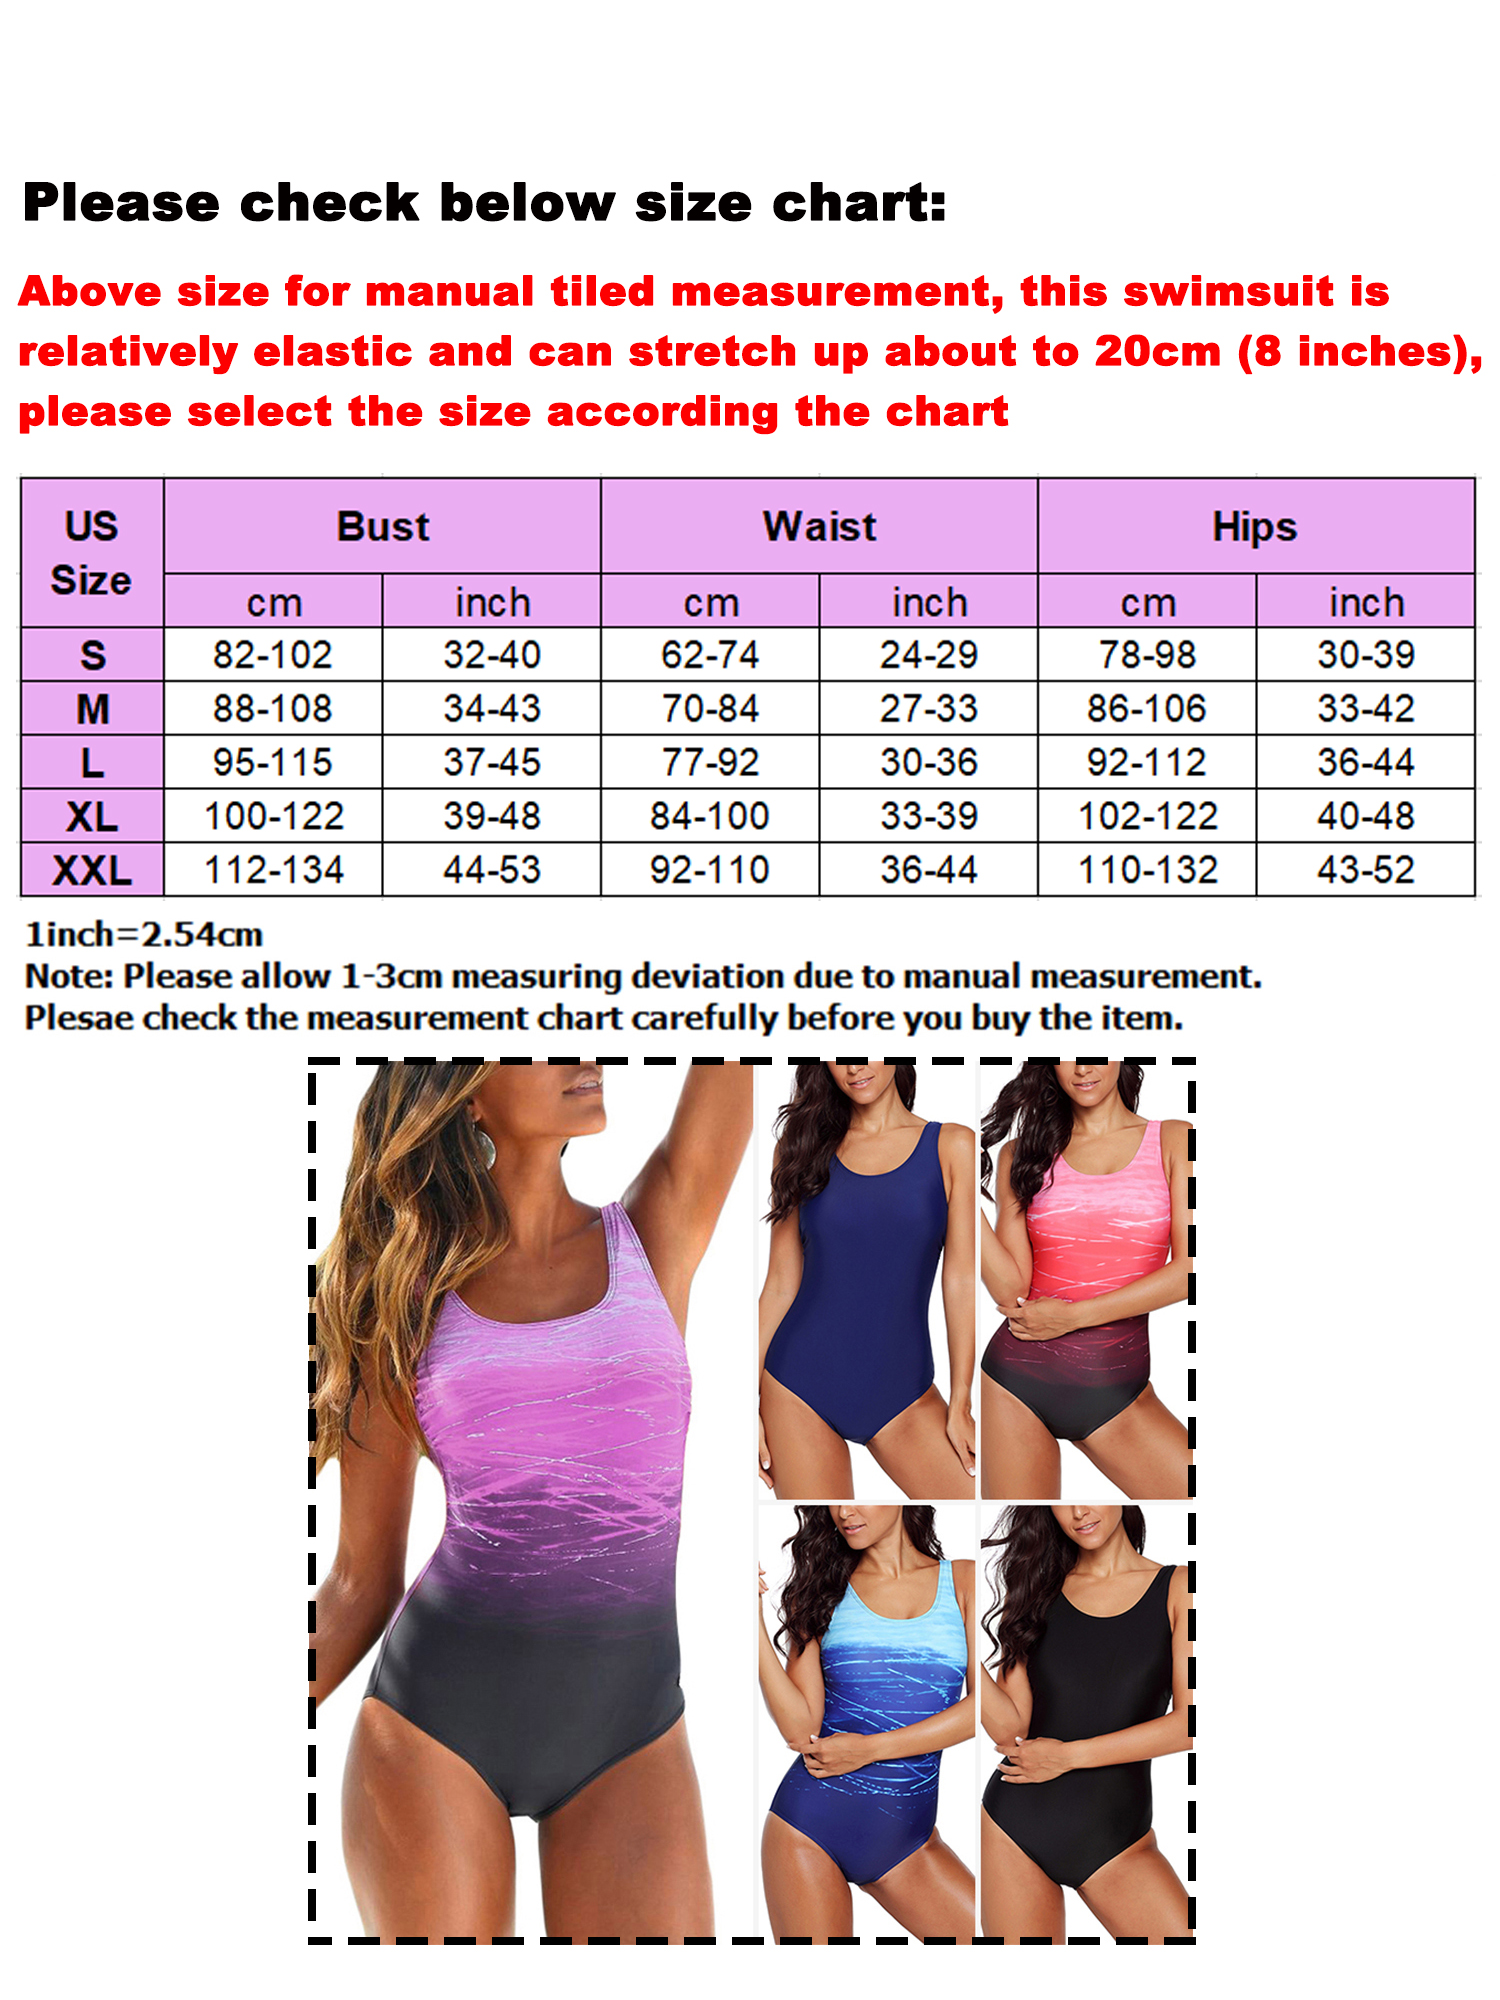 Sexy Dance Women's One Piece Swimsuits Gradient Color Athletic Swimwear Tummy Control Monokini Bathing Suits Size X-Large US 12-14 - image 2 of 5